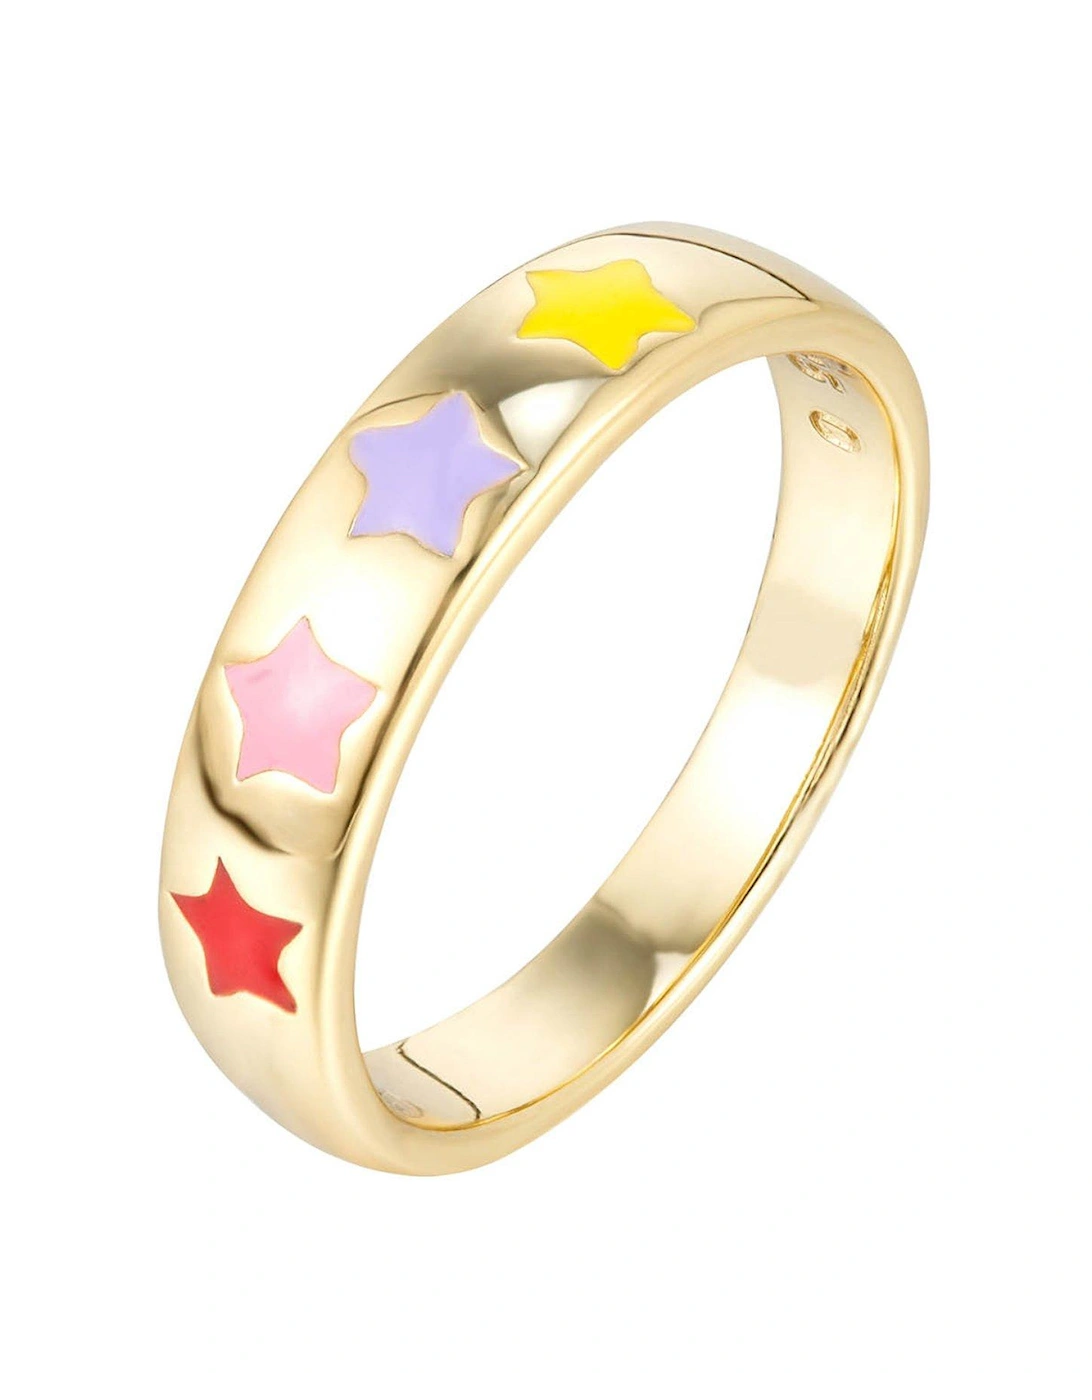 18ct Gold Plated Sterling Silver Enamel Star Ring, 2 of 1